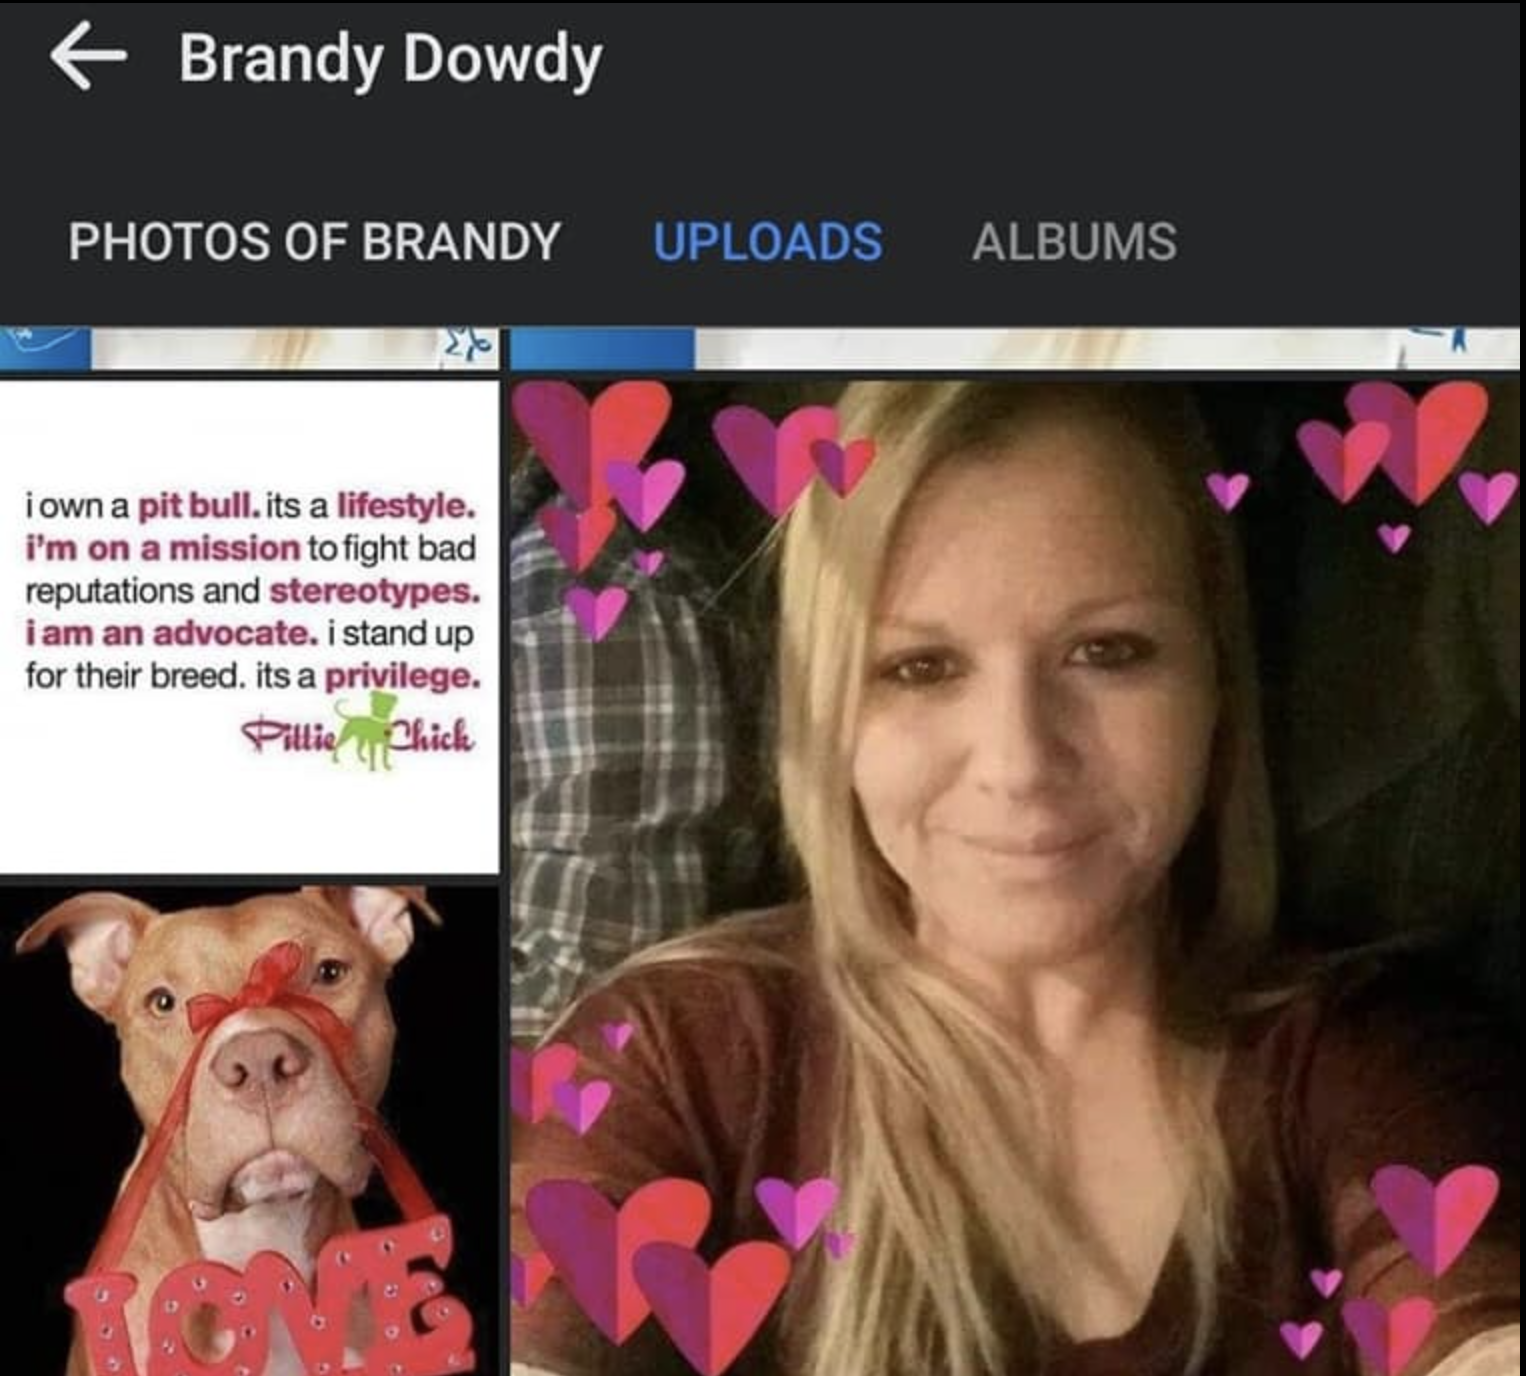 Composite image of Alabama manslaughter suspect and a pit bull terrier dog